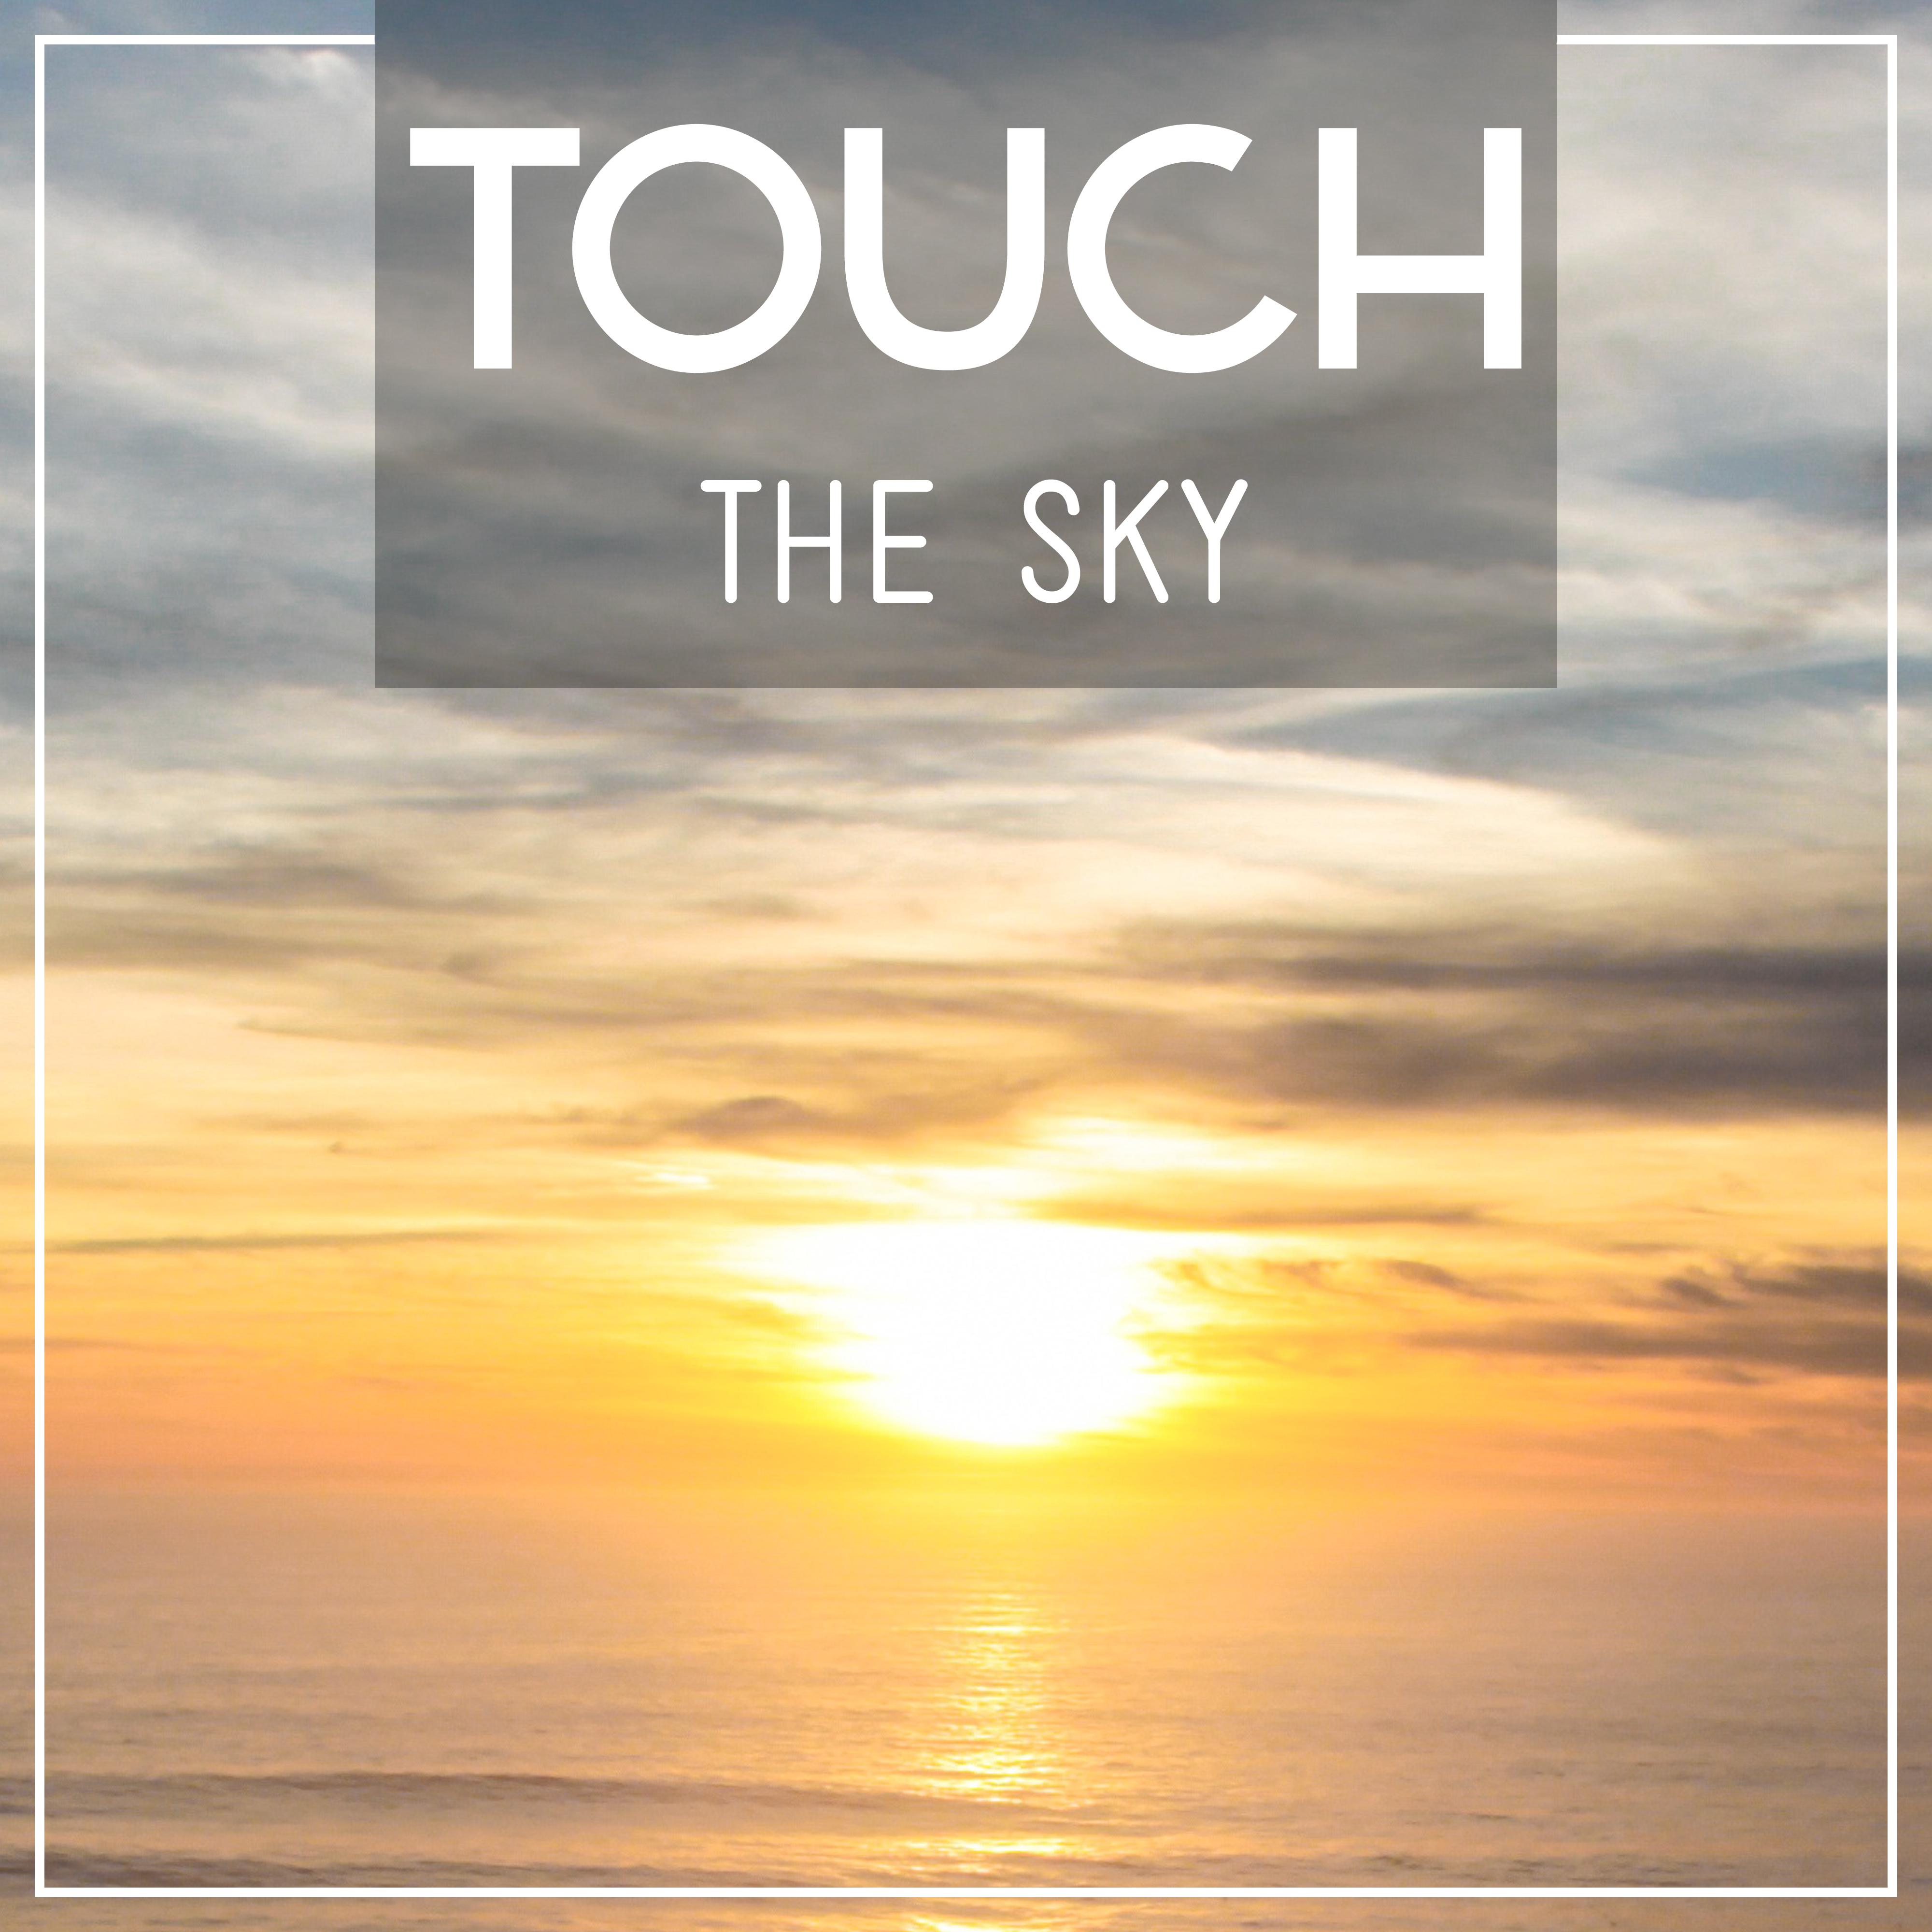 Touch the Sky – Summertime, Holiday Songs, Sunrise, Best Chill, Relax on the Beach, Ambient Music